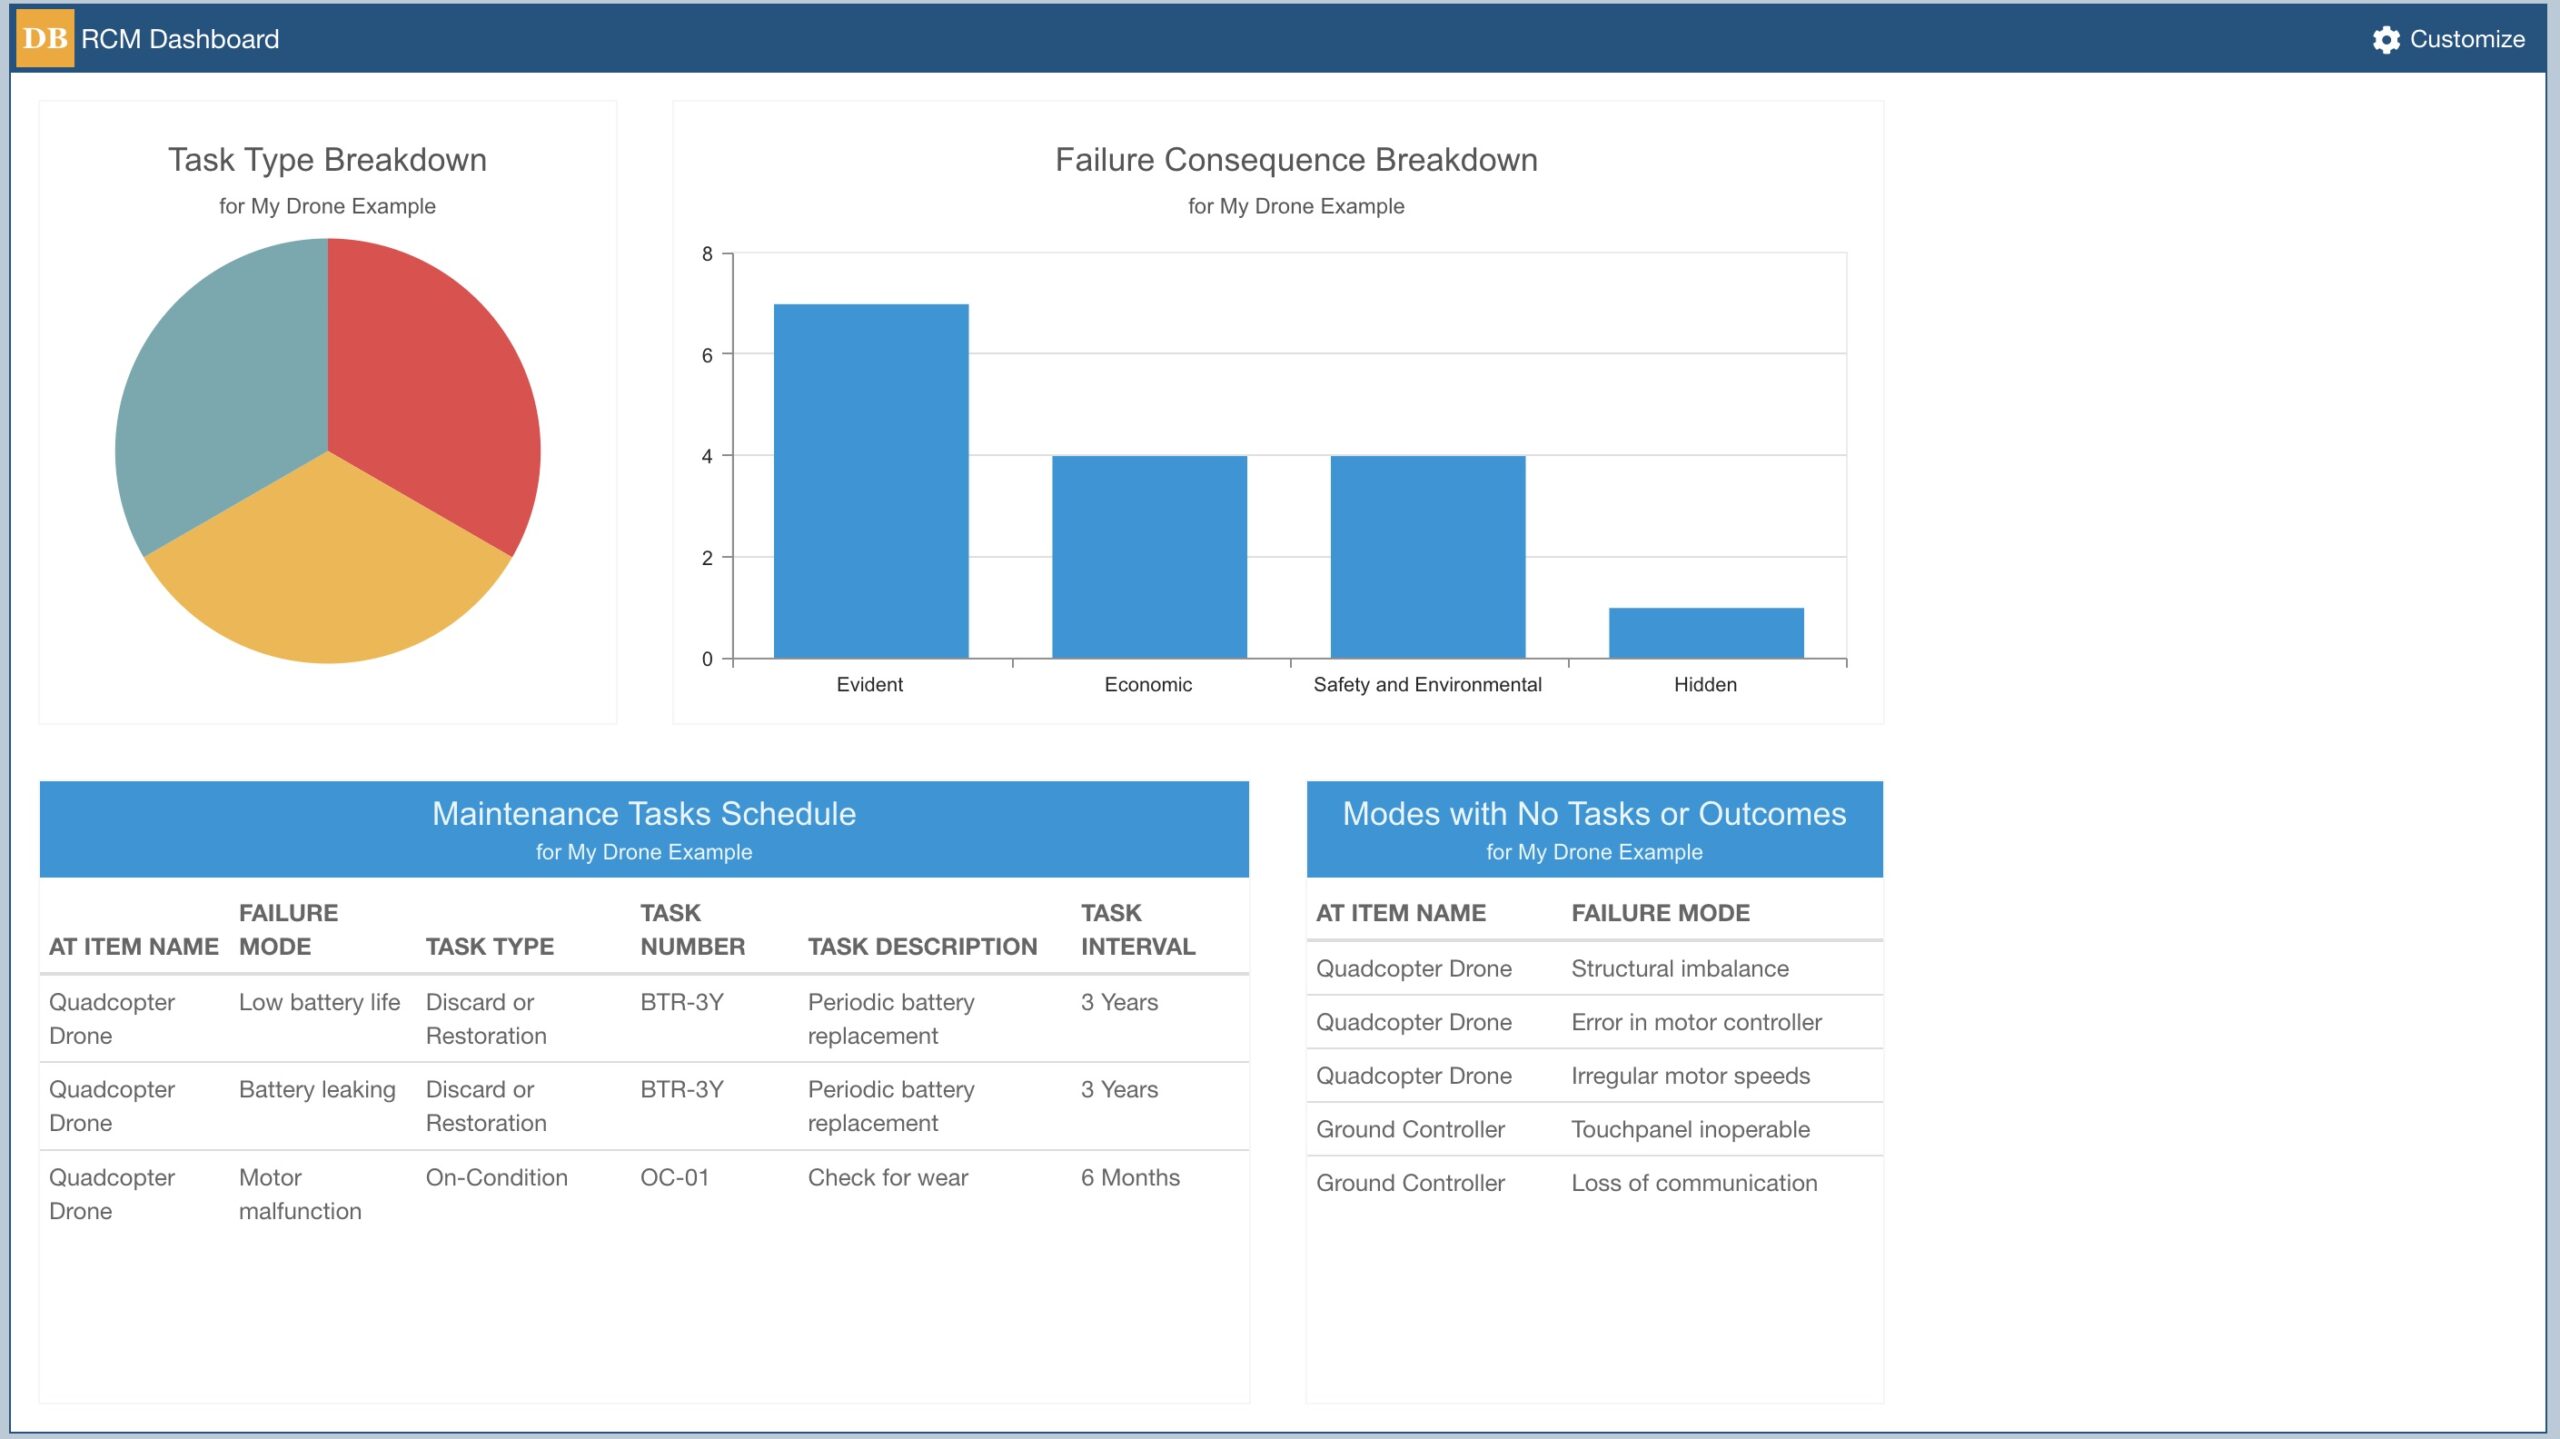 RCM Dashboard Overview